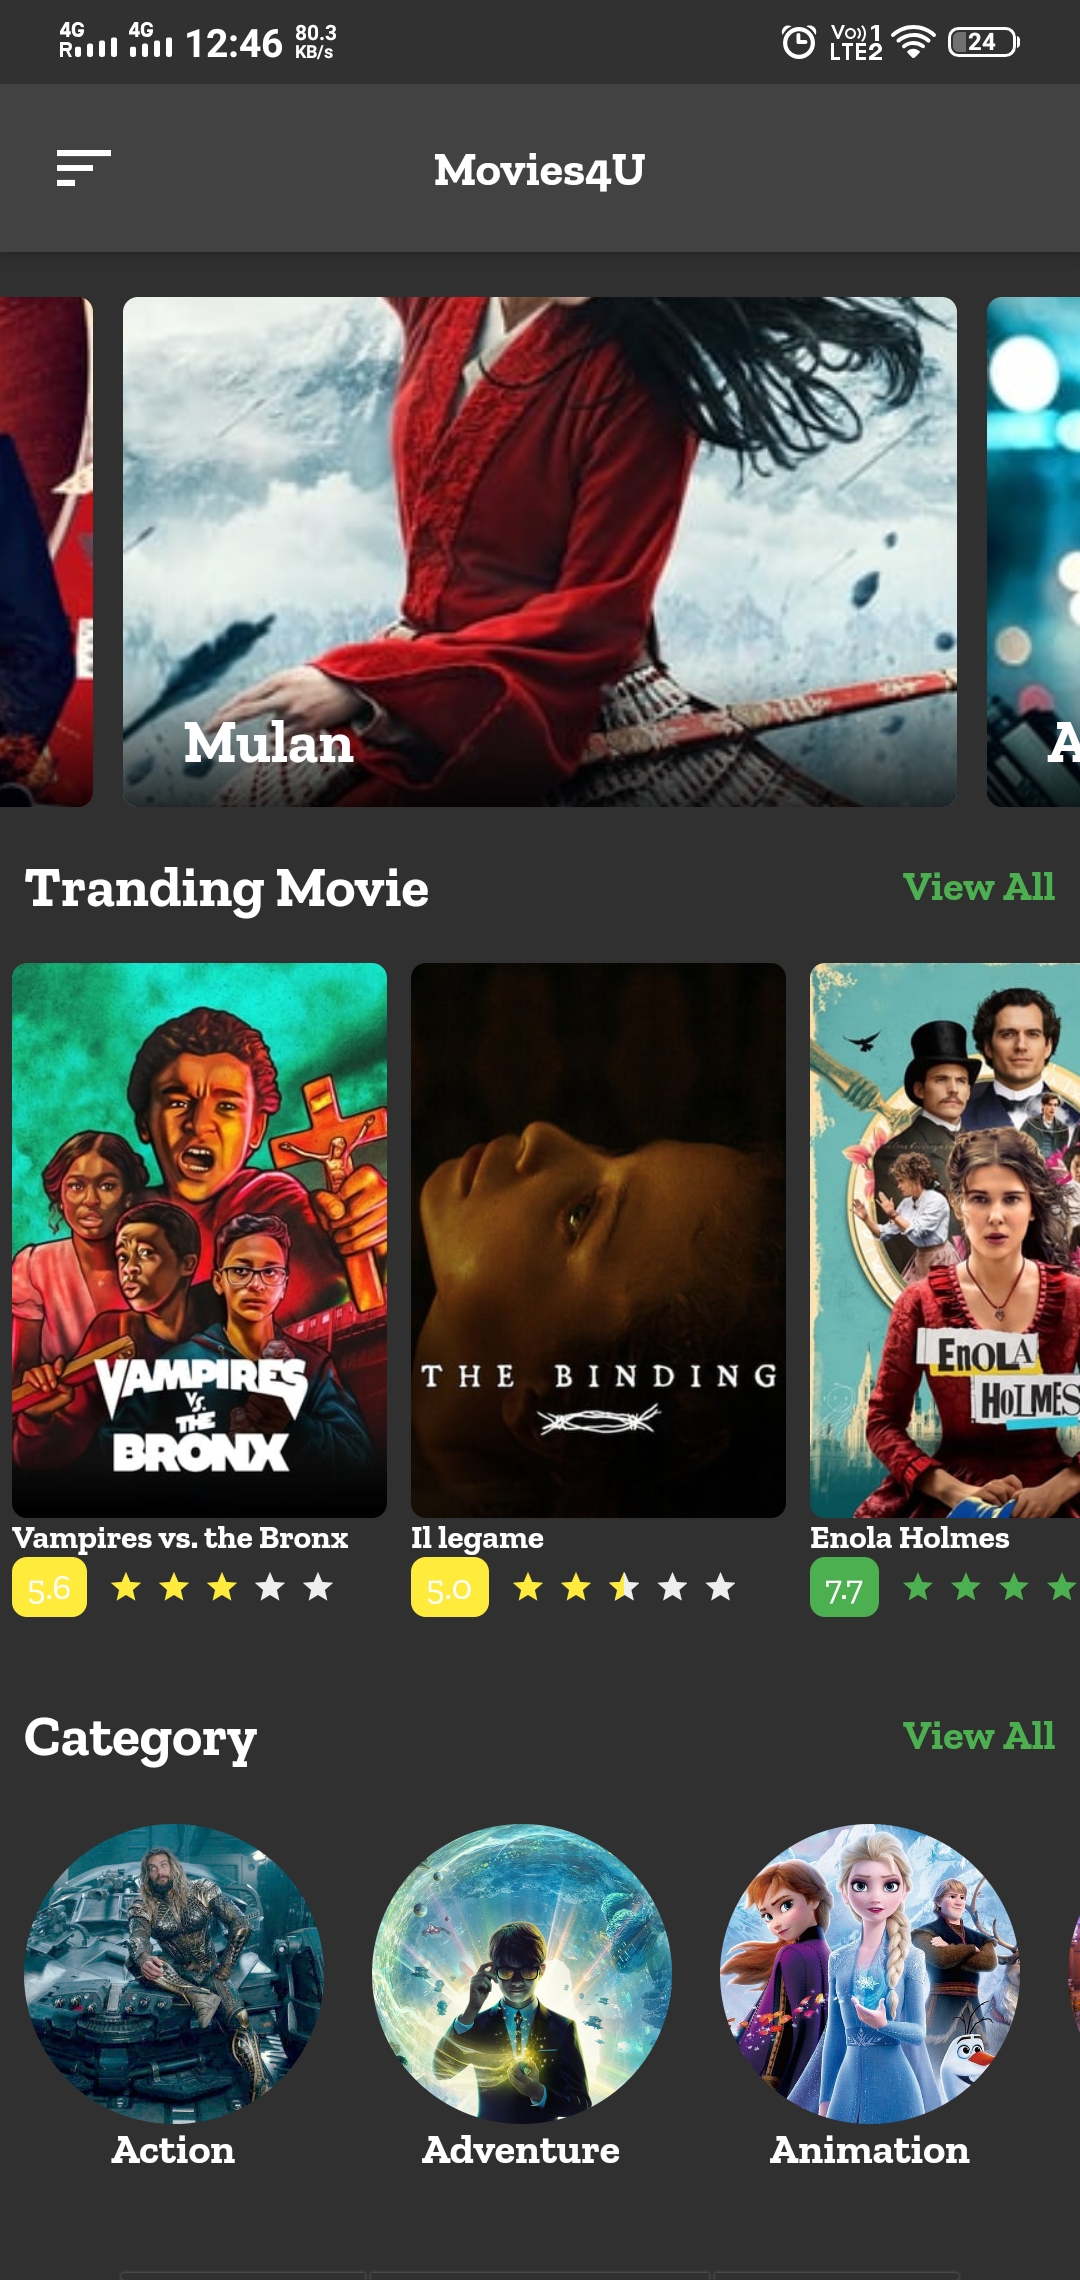 A fetch latest upcomming movies app with flutter